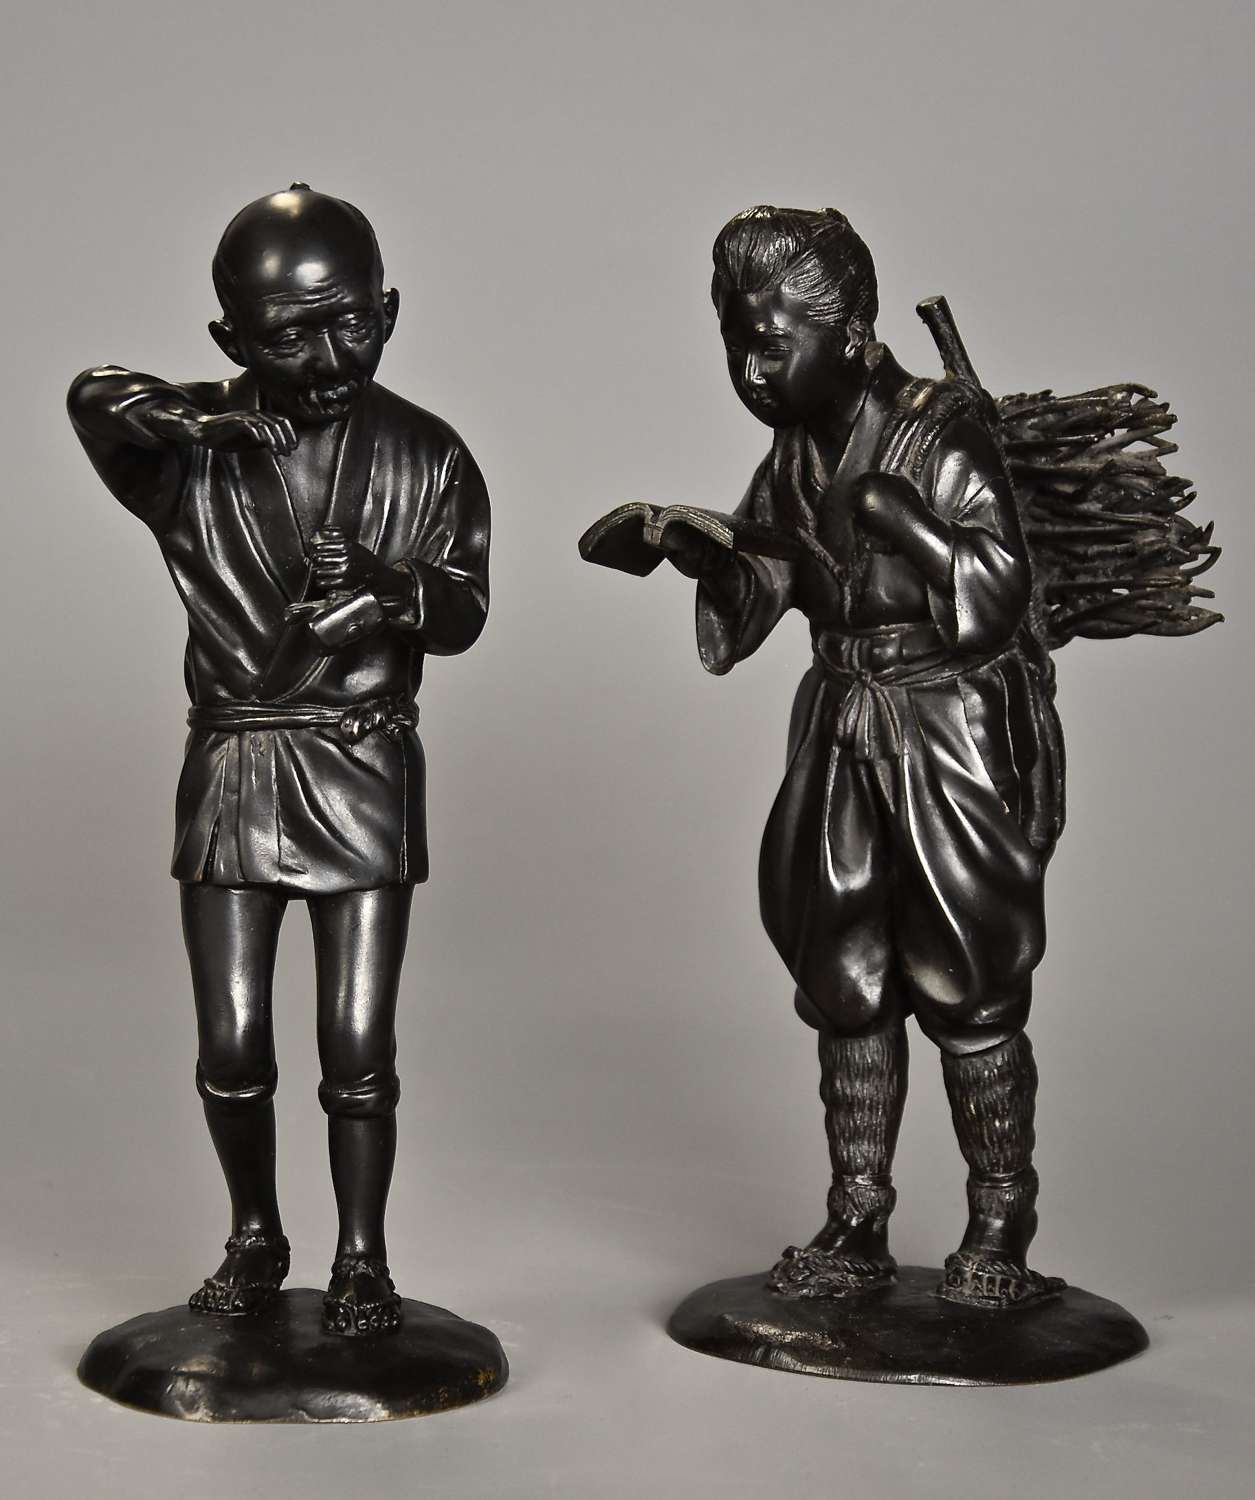 Pair of fine quality Meiji Japanese bronzes of a peasant man & woman